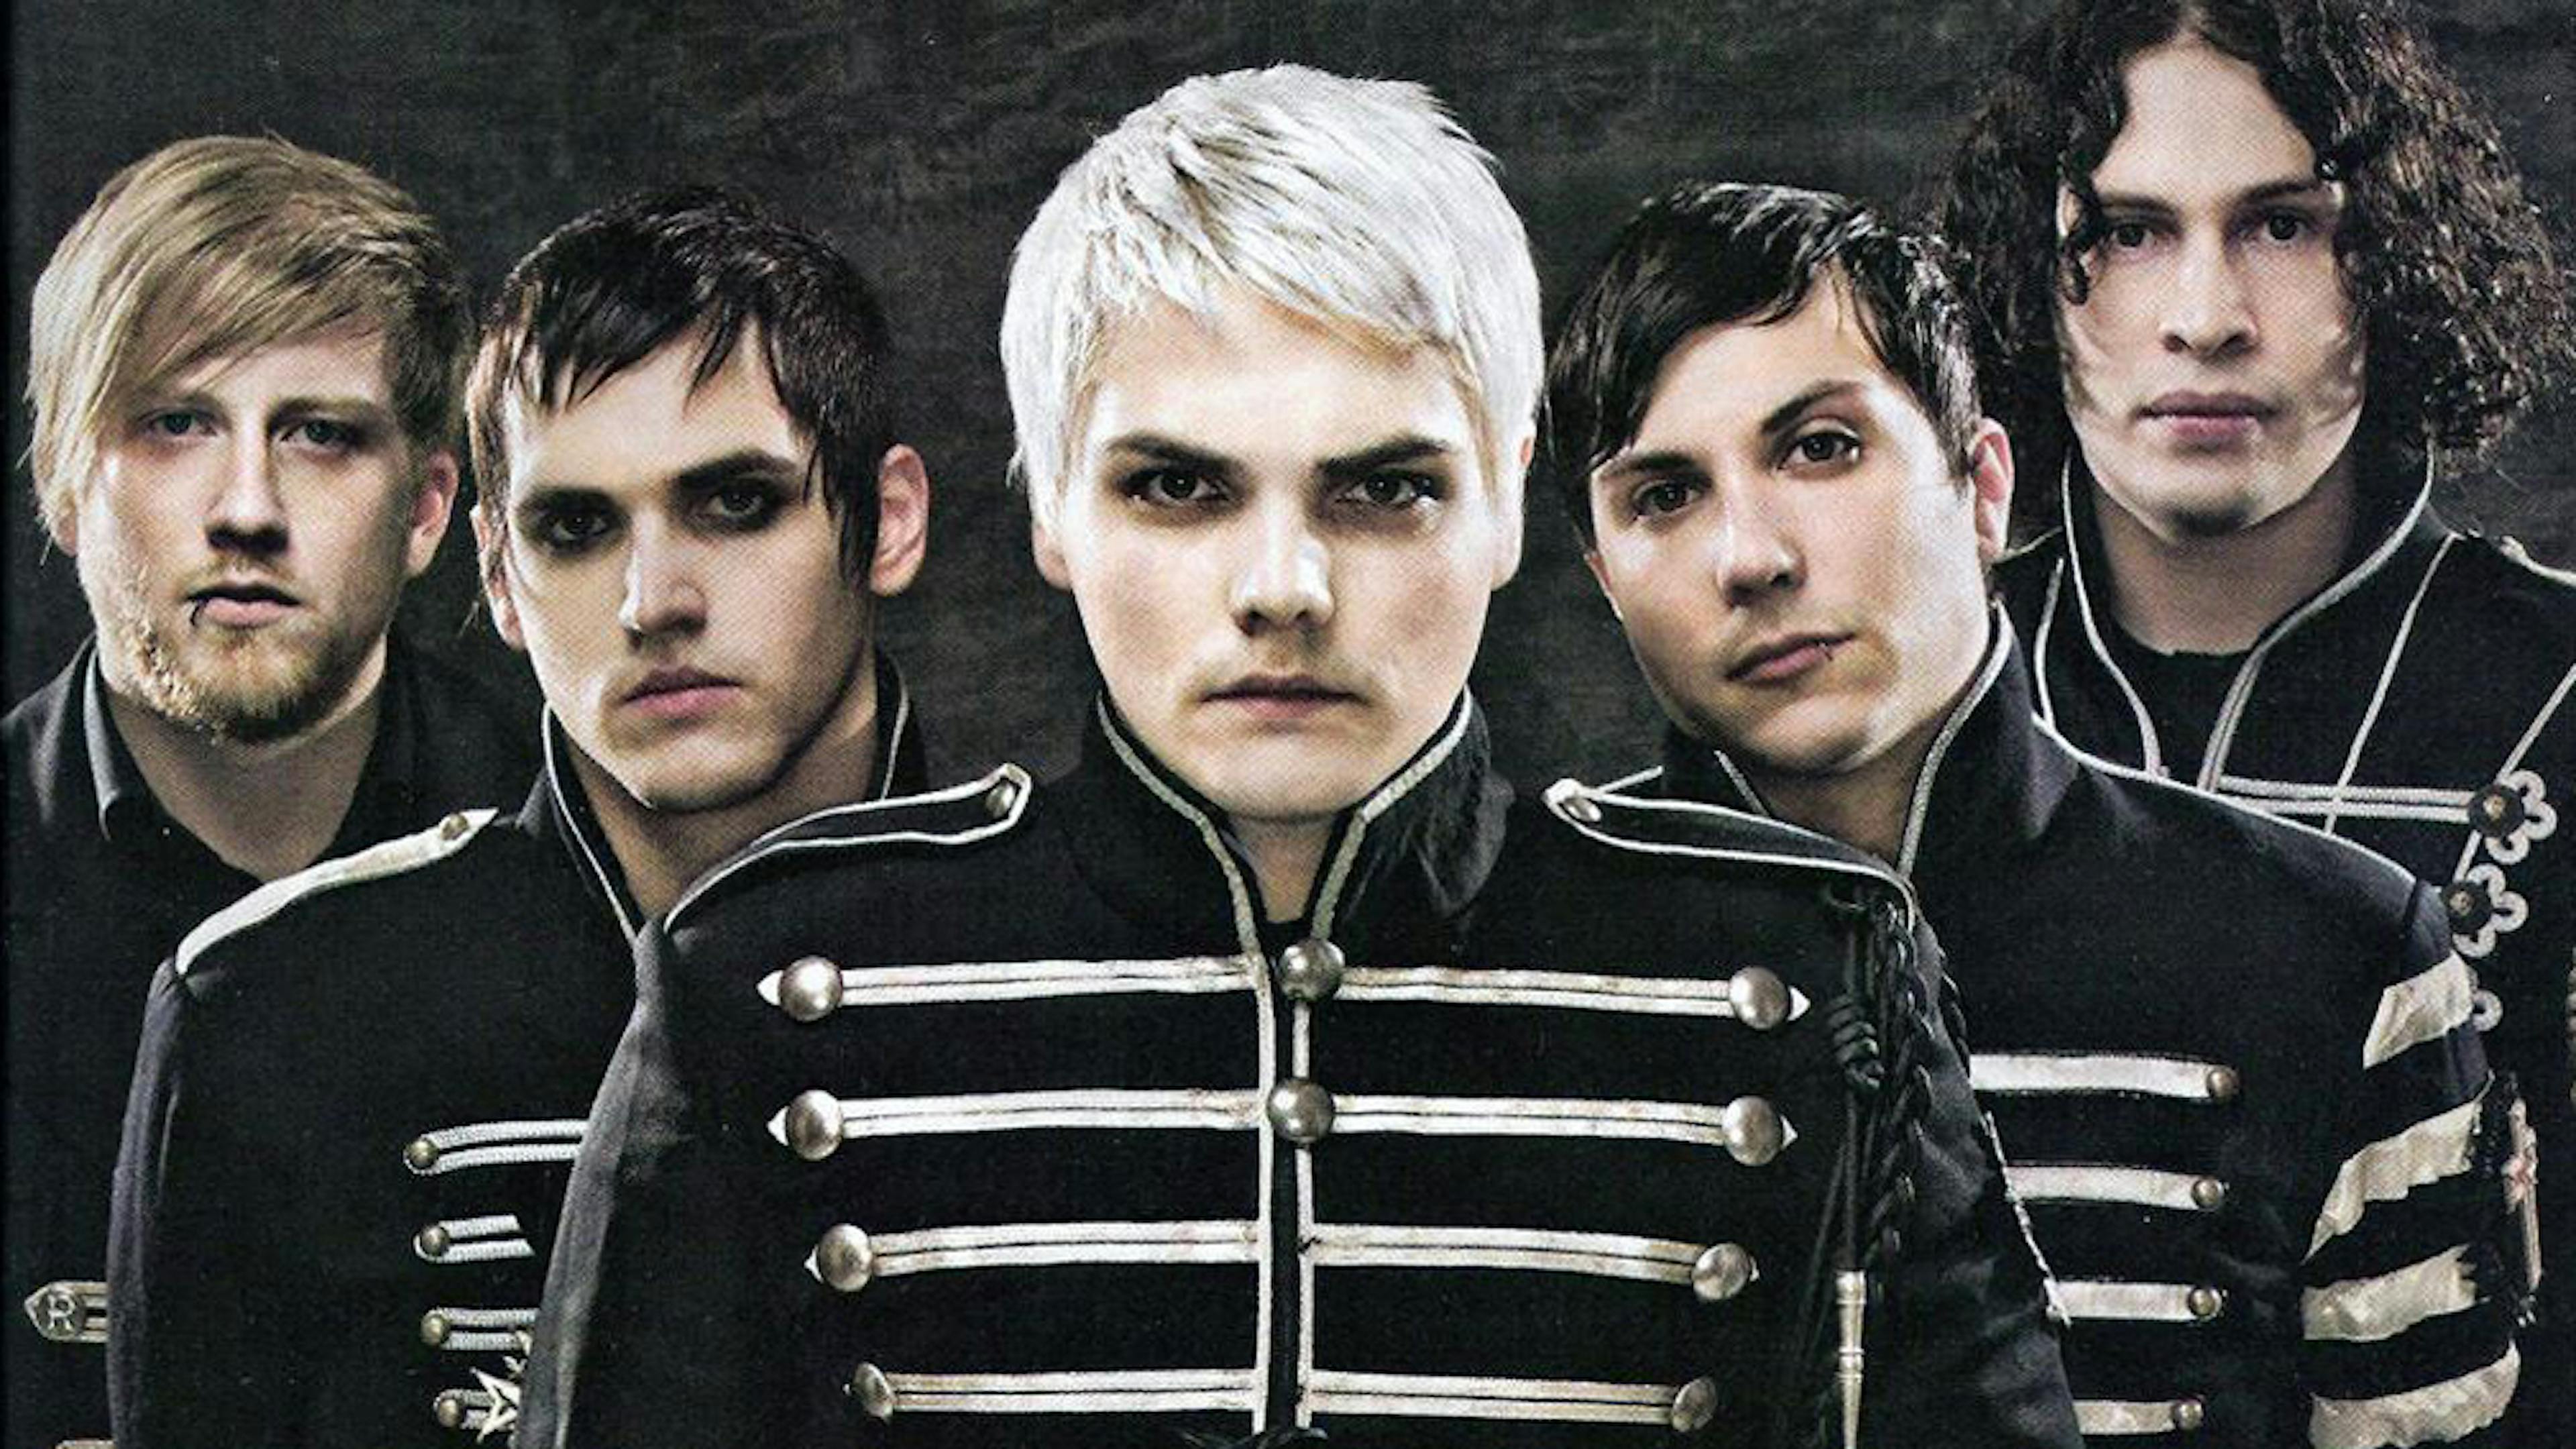 Gerard Way Talks About The "Safety" Of Writing In Character For The Black Parade